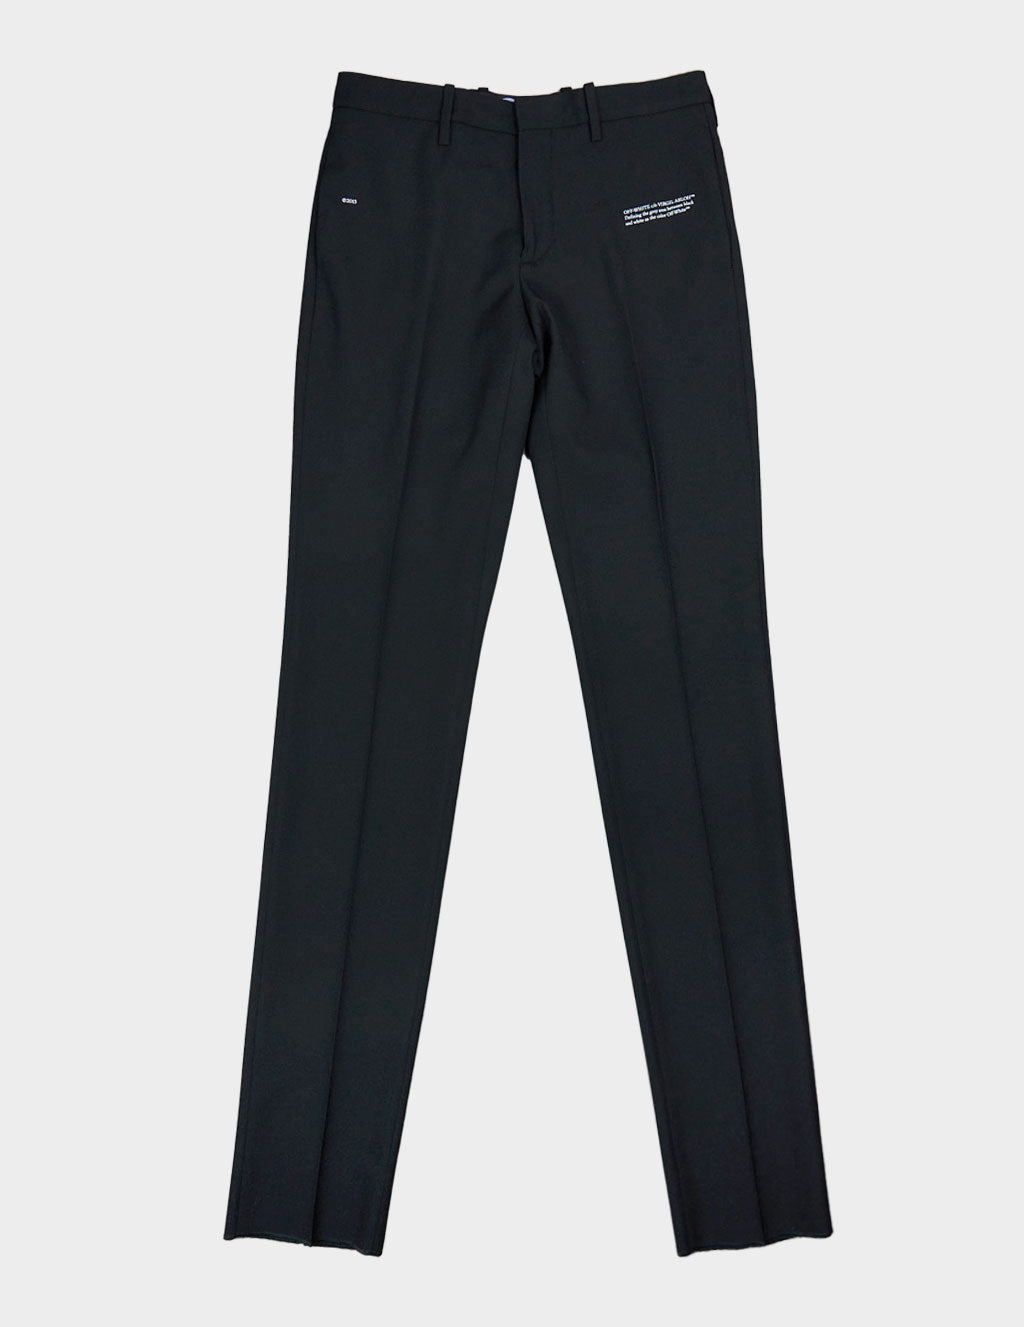 Off-White Men's Corp Skinny Pants product